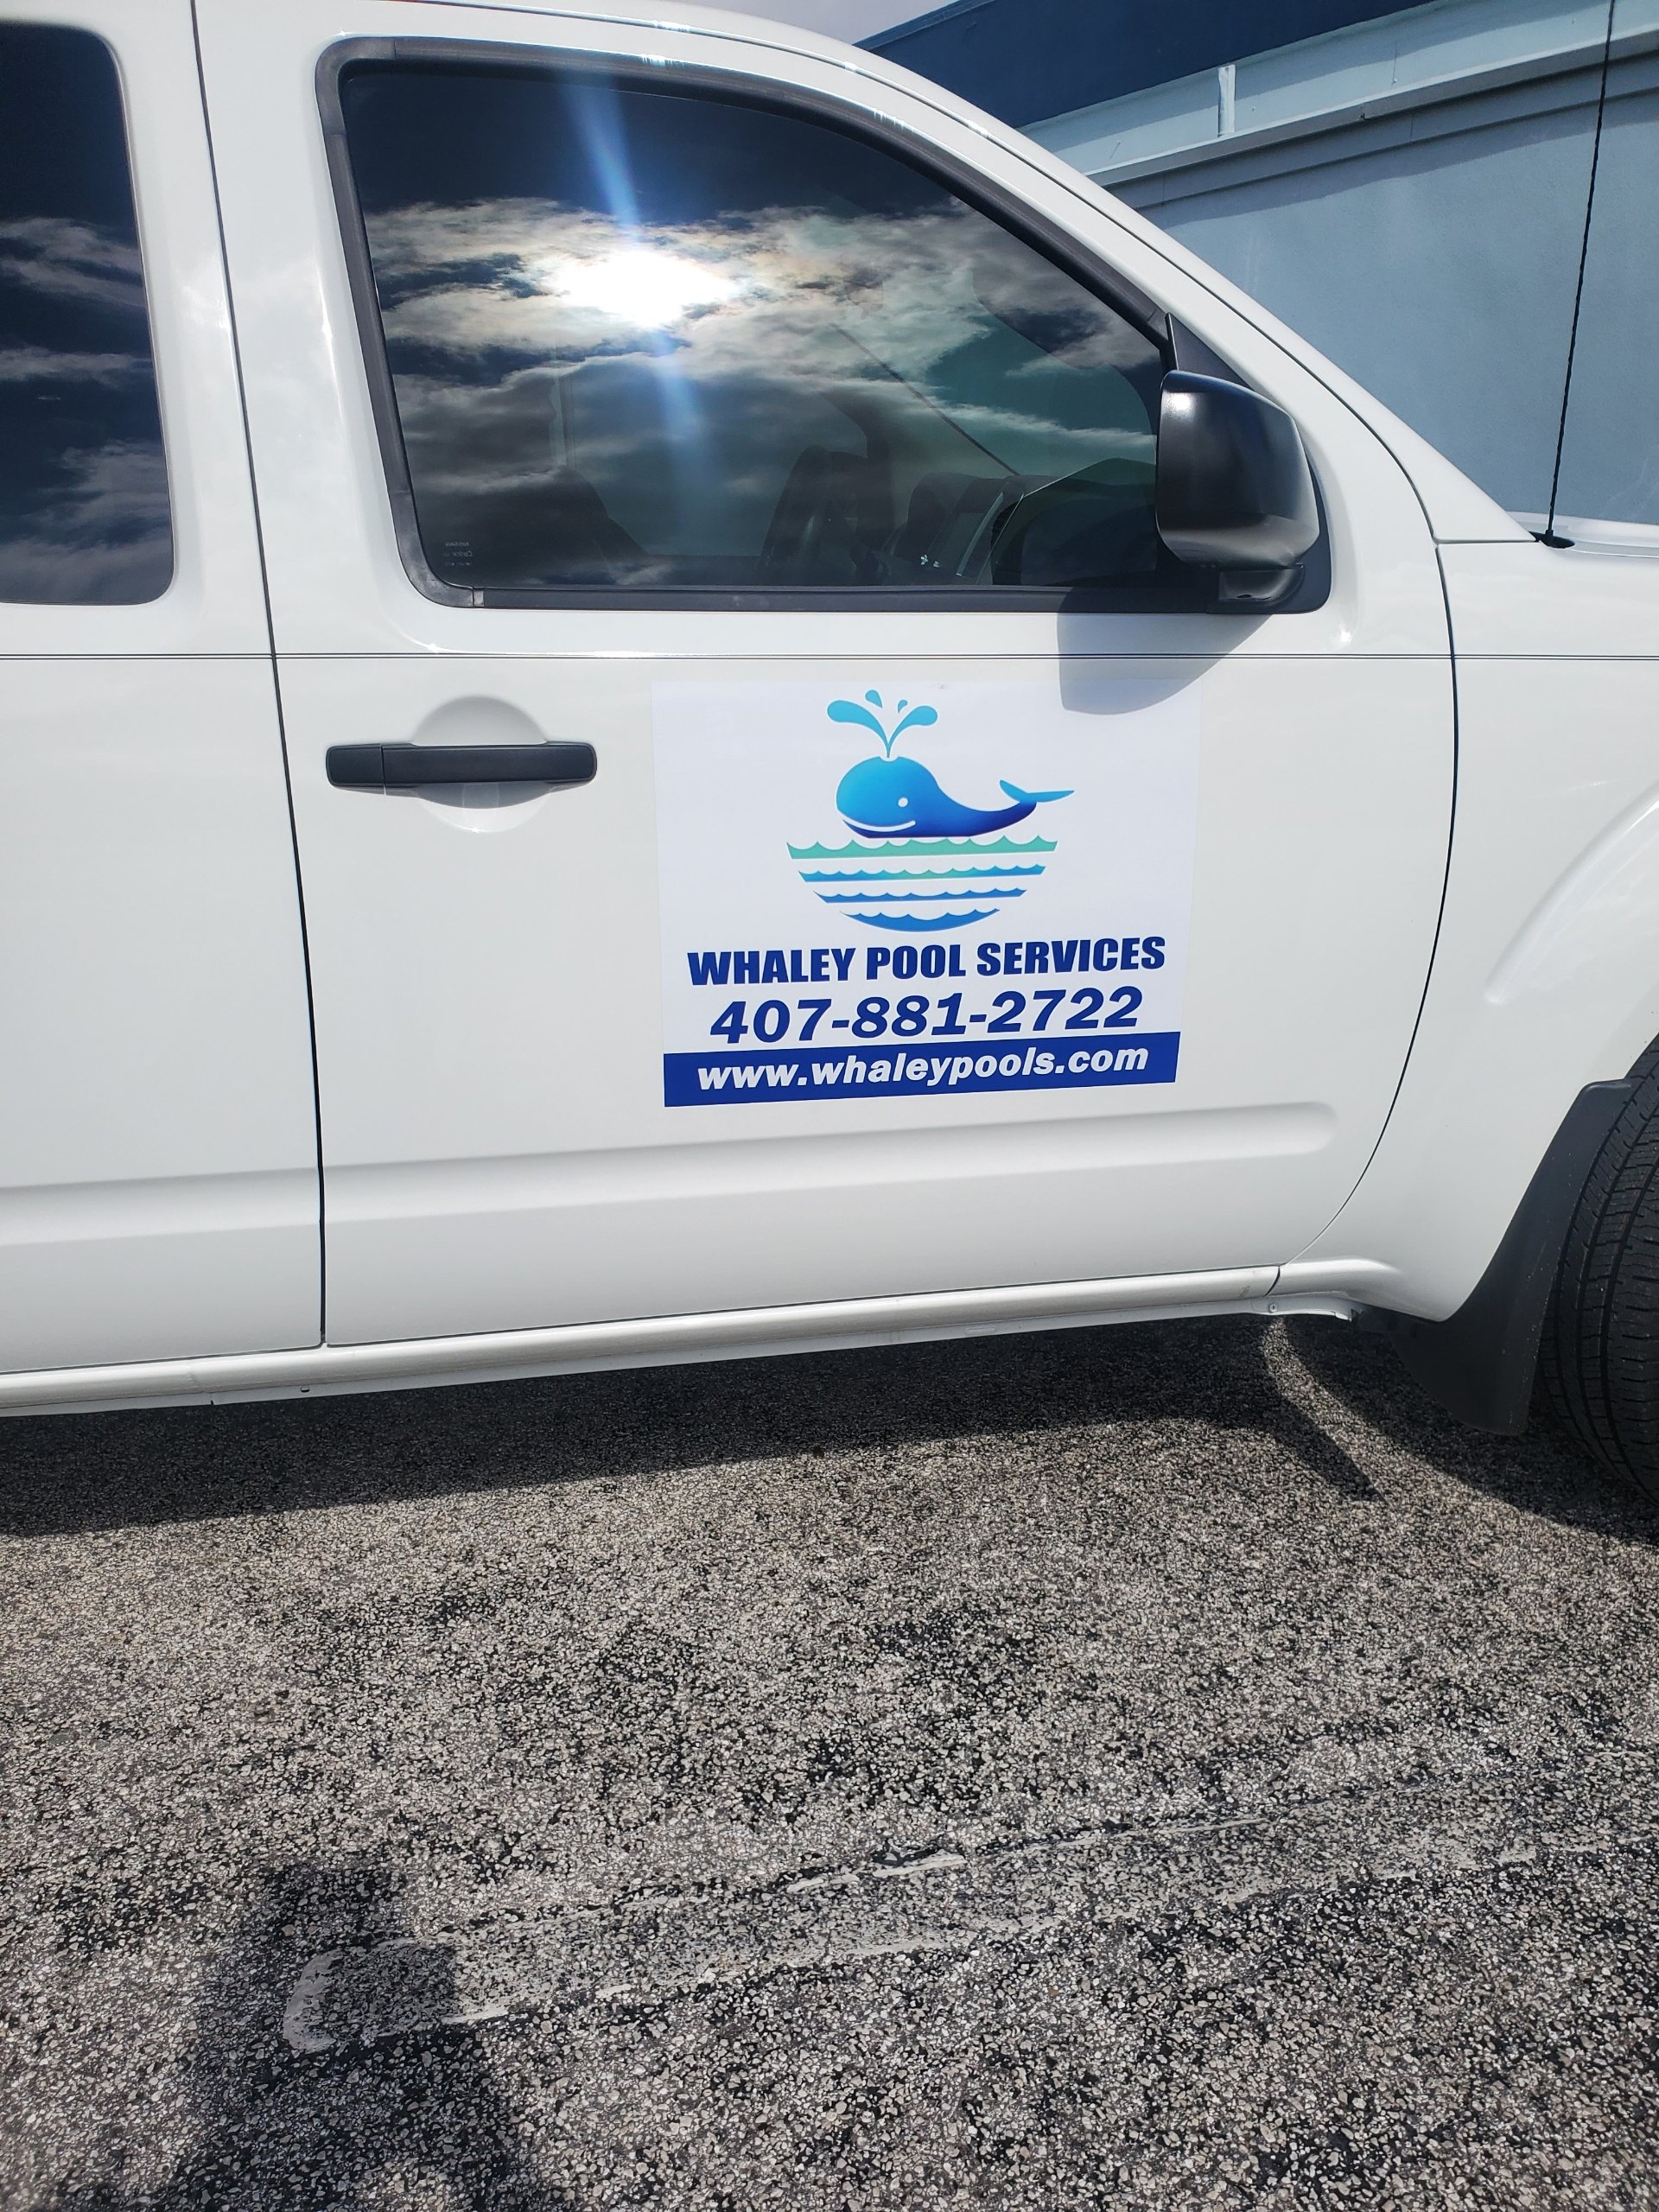 Whaley Pool Services Logo